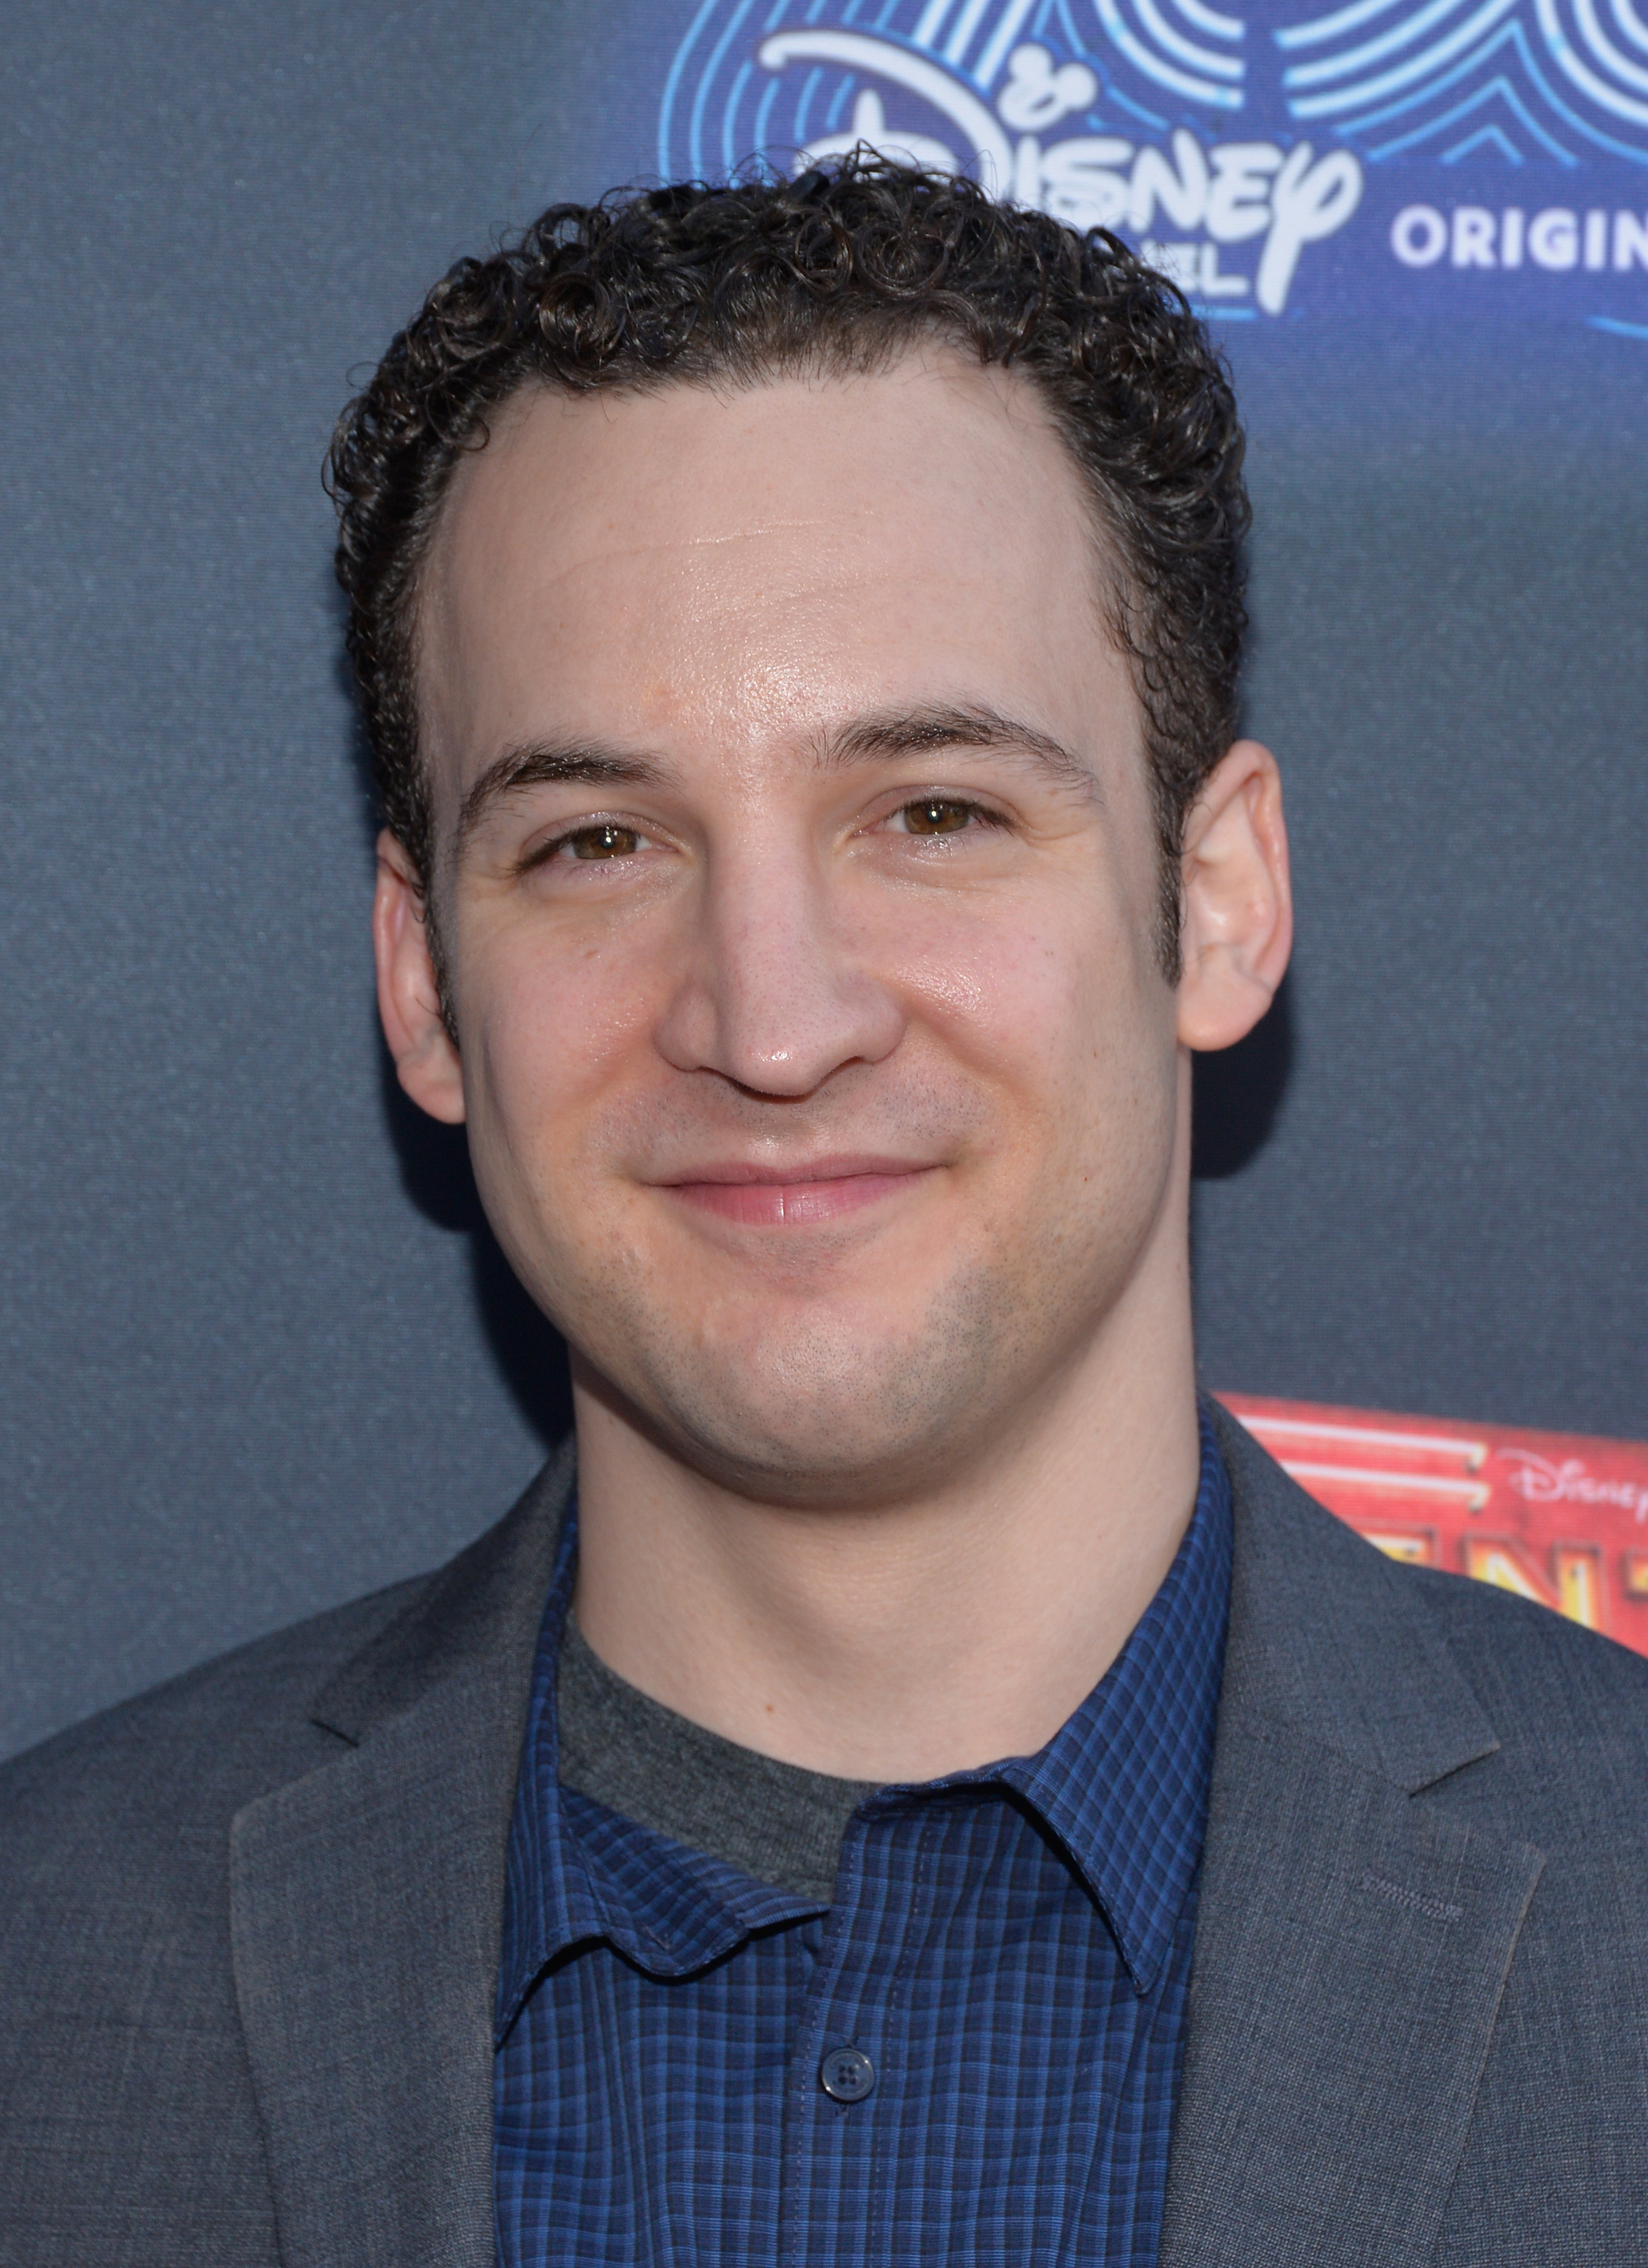 Actor Ben Savage attends the premiere of 100th Disney Channel's Original Movie "Adventures In Babysitting" and celebration of all DCOMS at Directors Guild Of America on June 23, 2016 in Los Angeles.